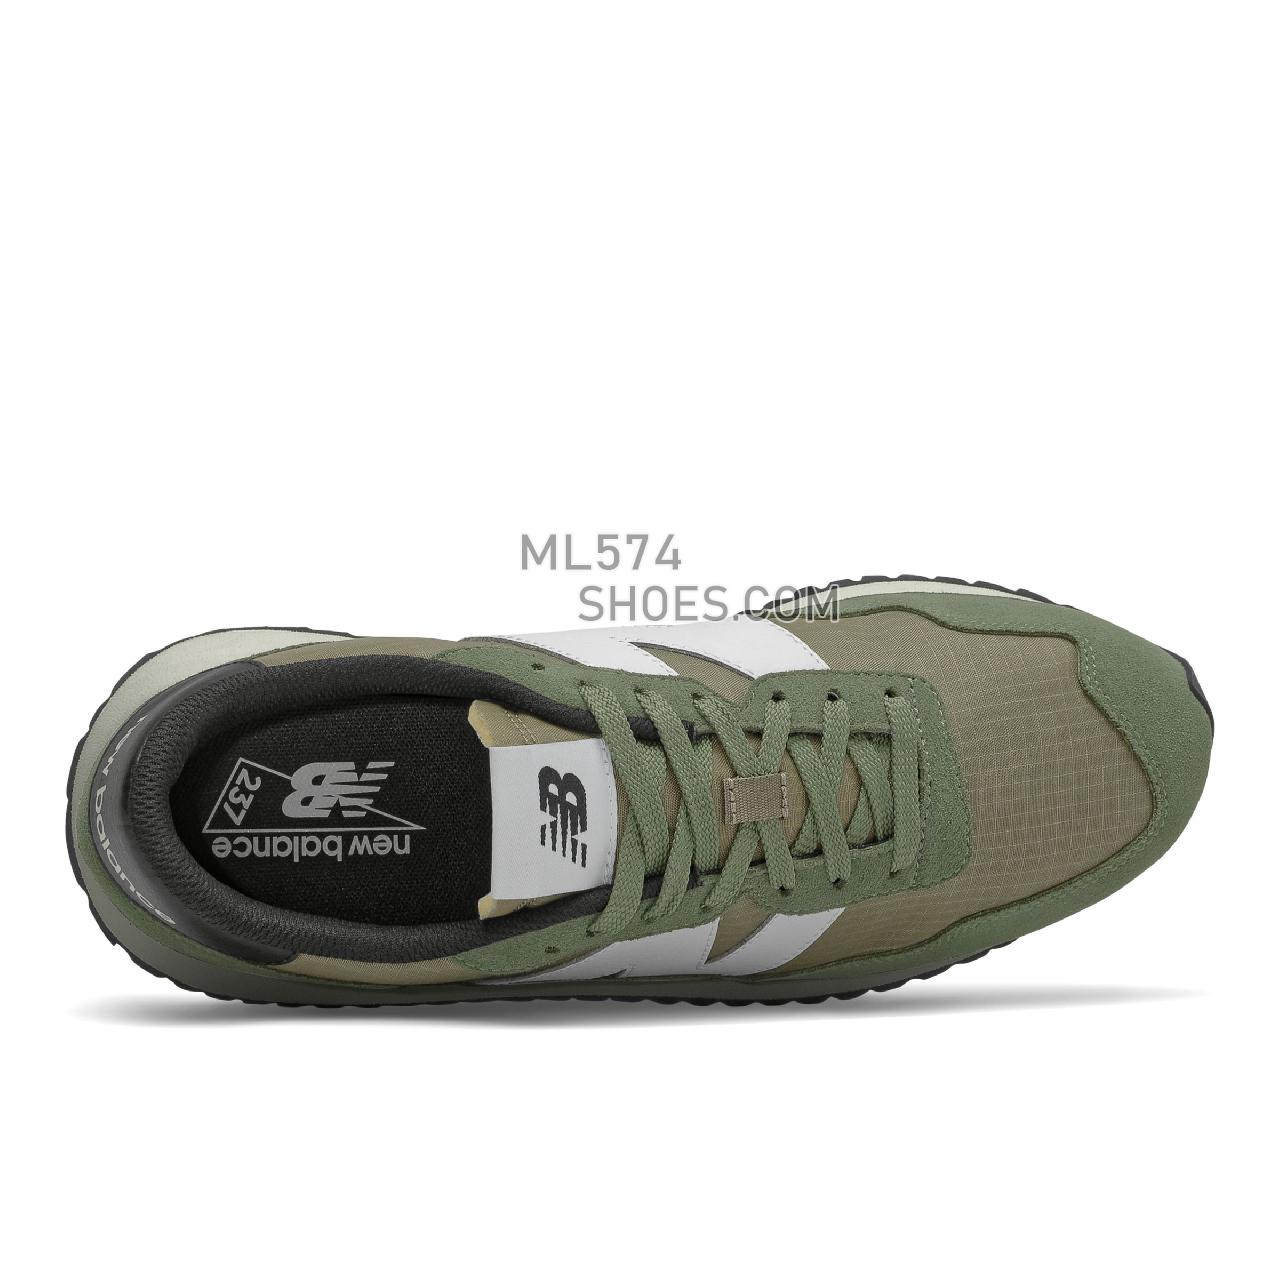 New Balance 237 - Men's Sport Style Sneakers - Norway Spruce with Covert Green - MS237UT1